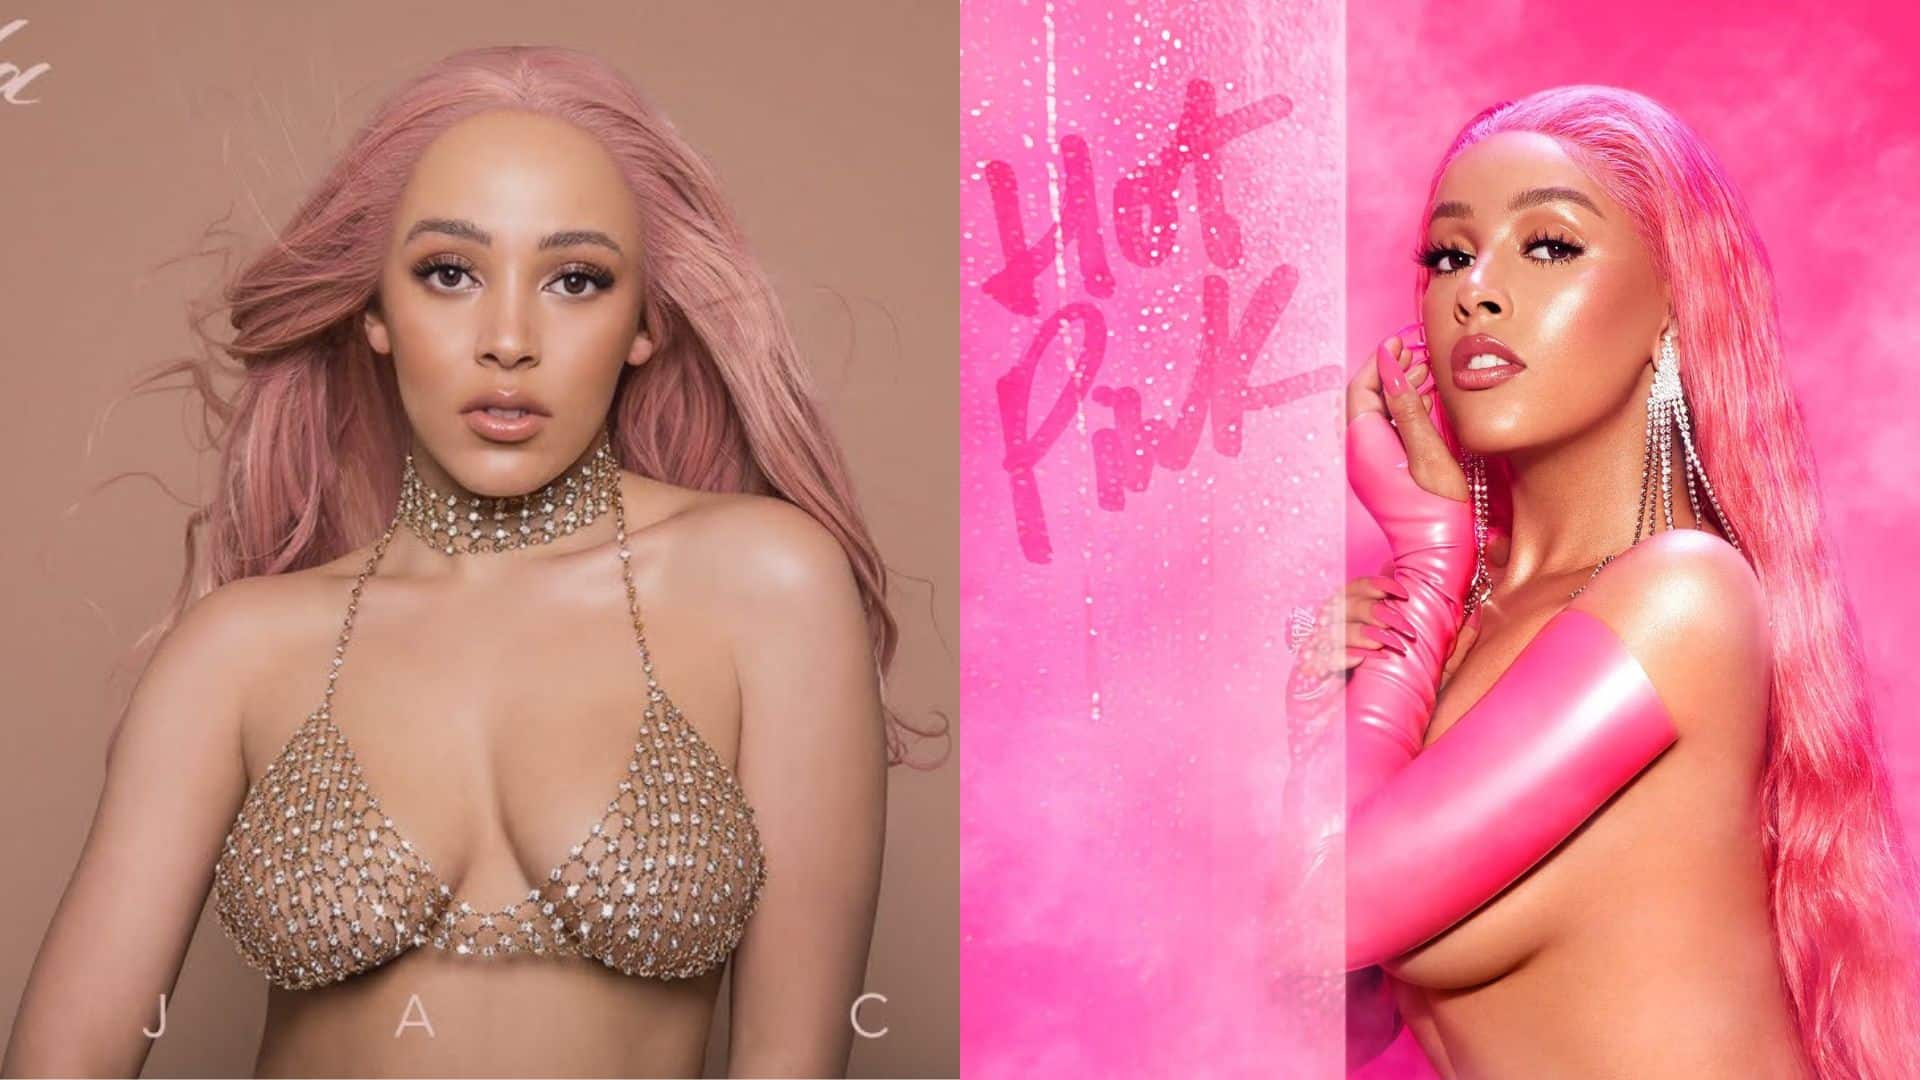 Doja Cat Hottest Female Rappers in the World